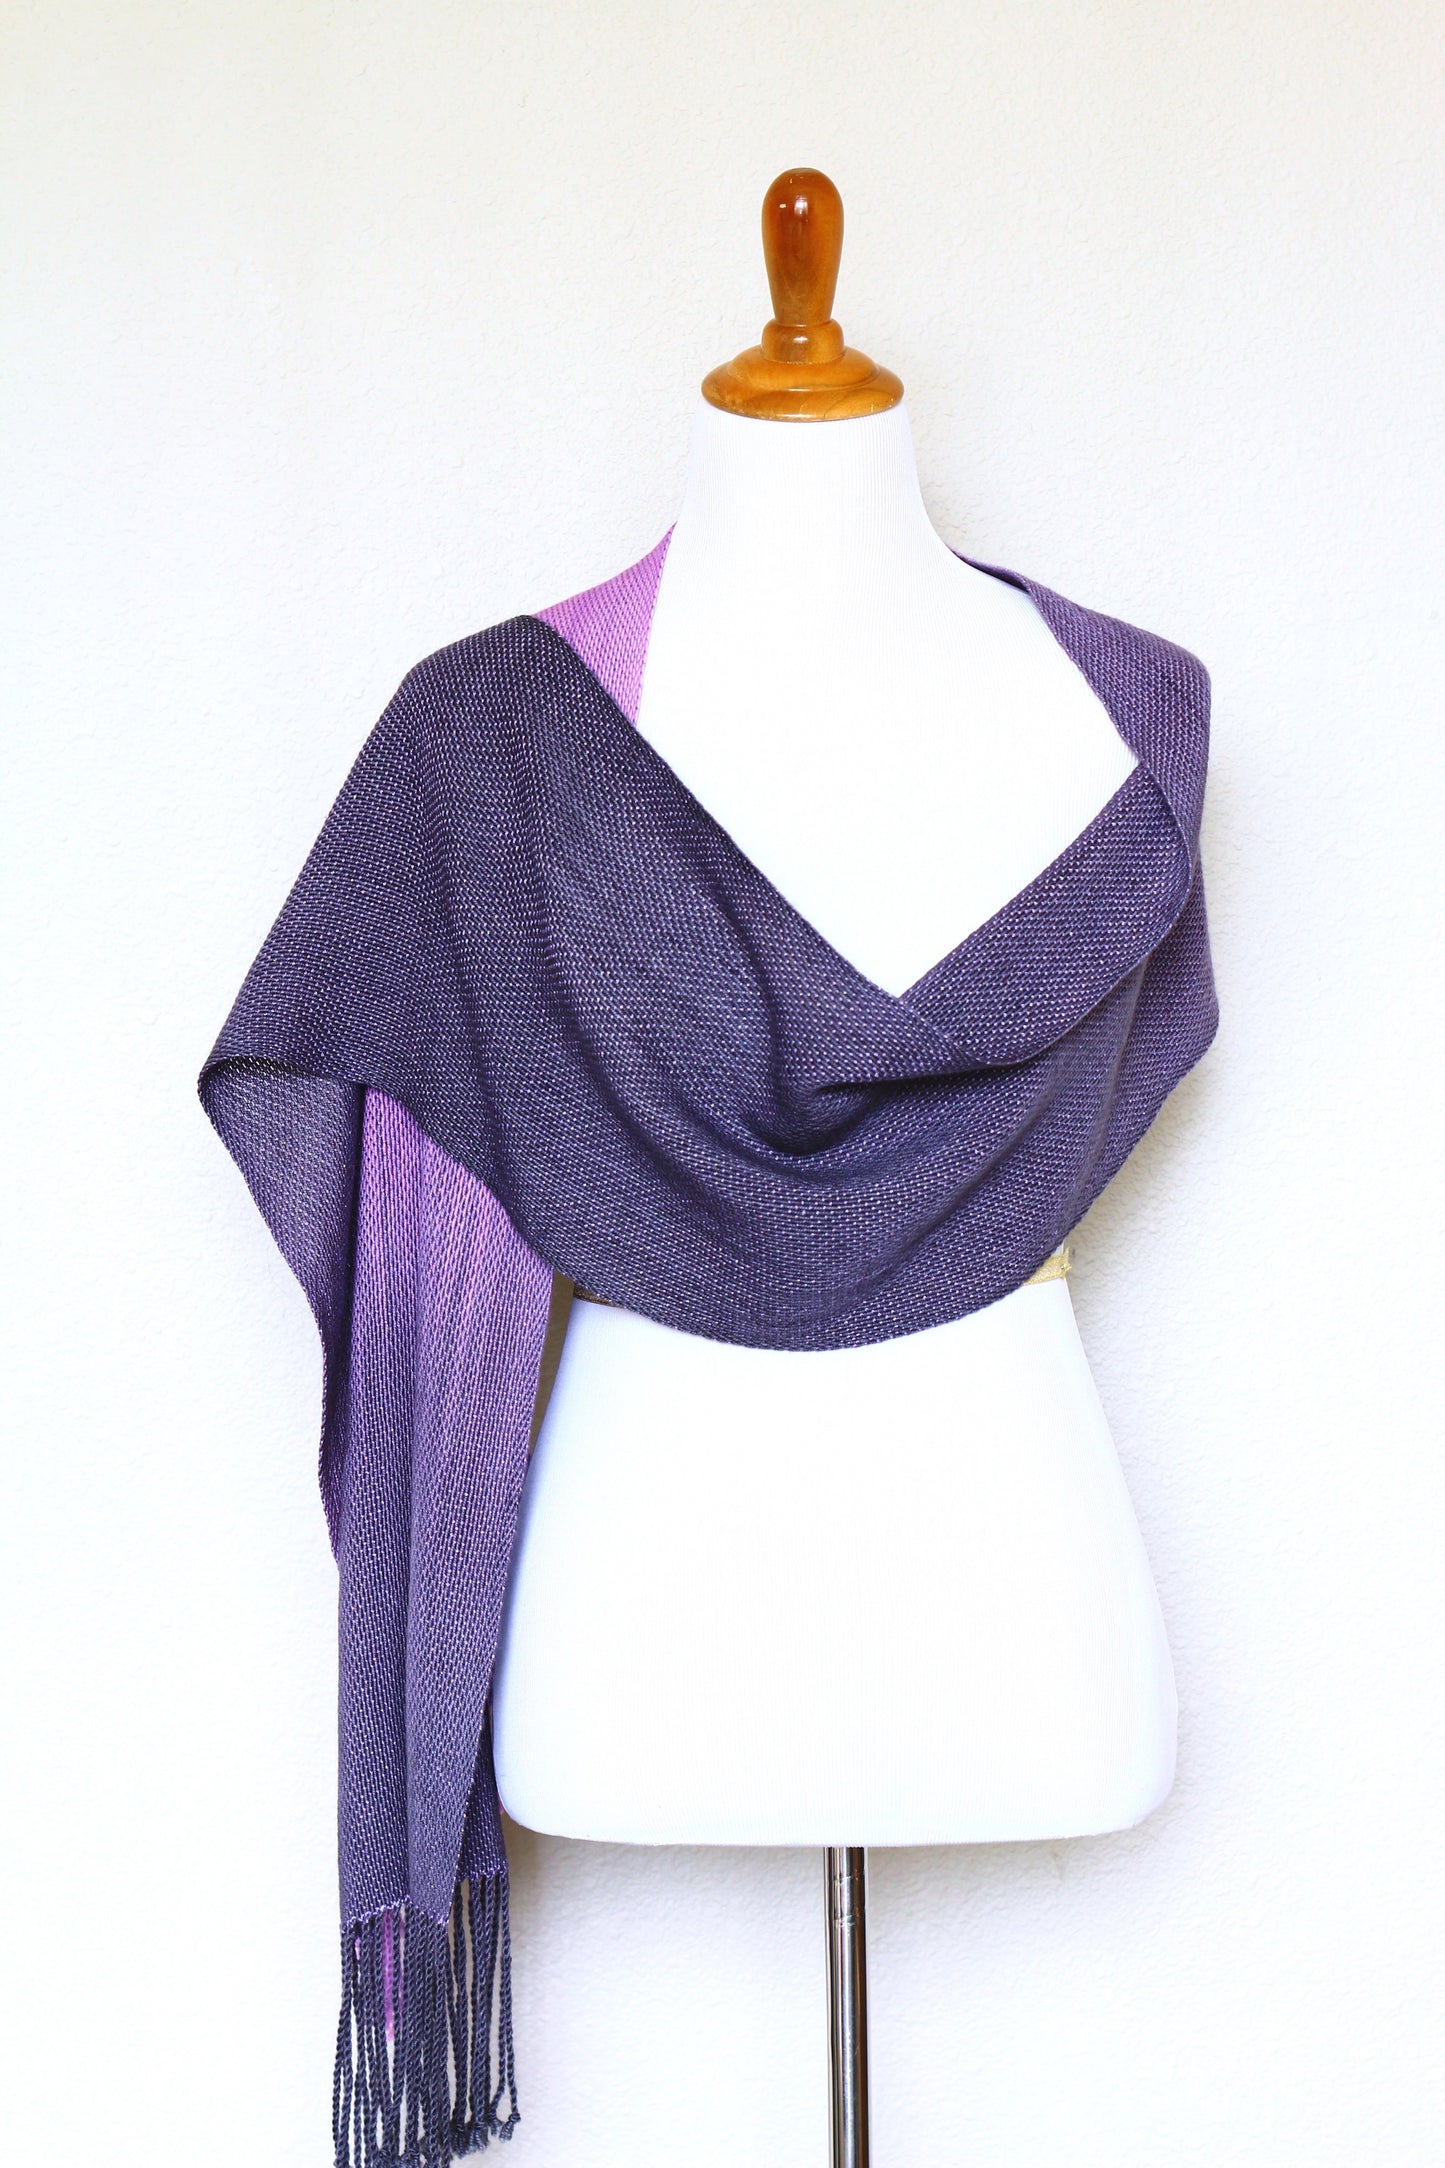 Woven scarf in gradient violet colors, wool scarf, gift for her